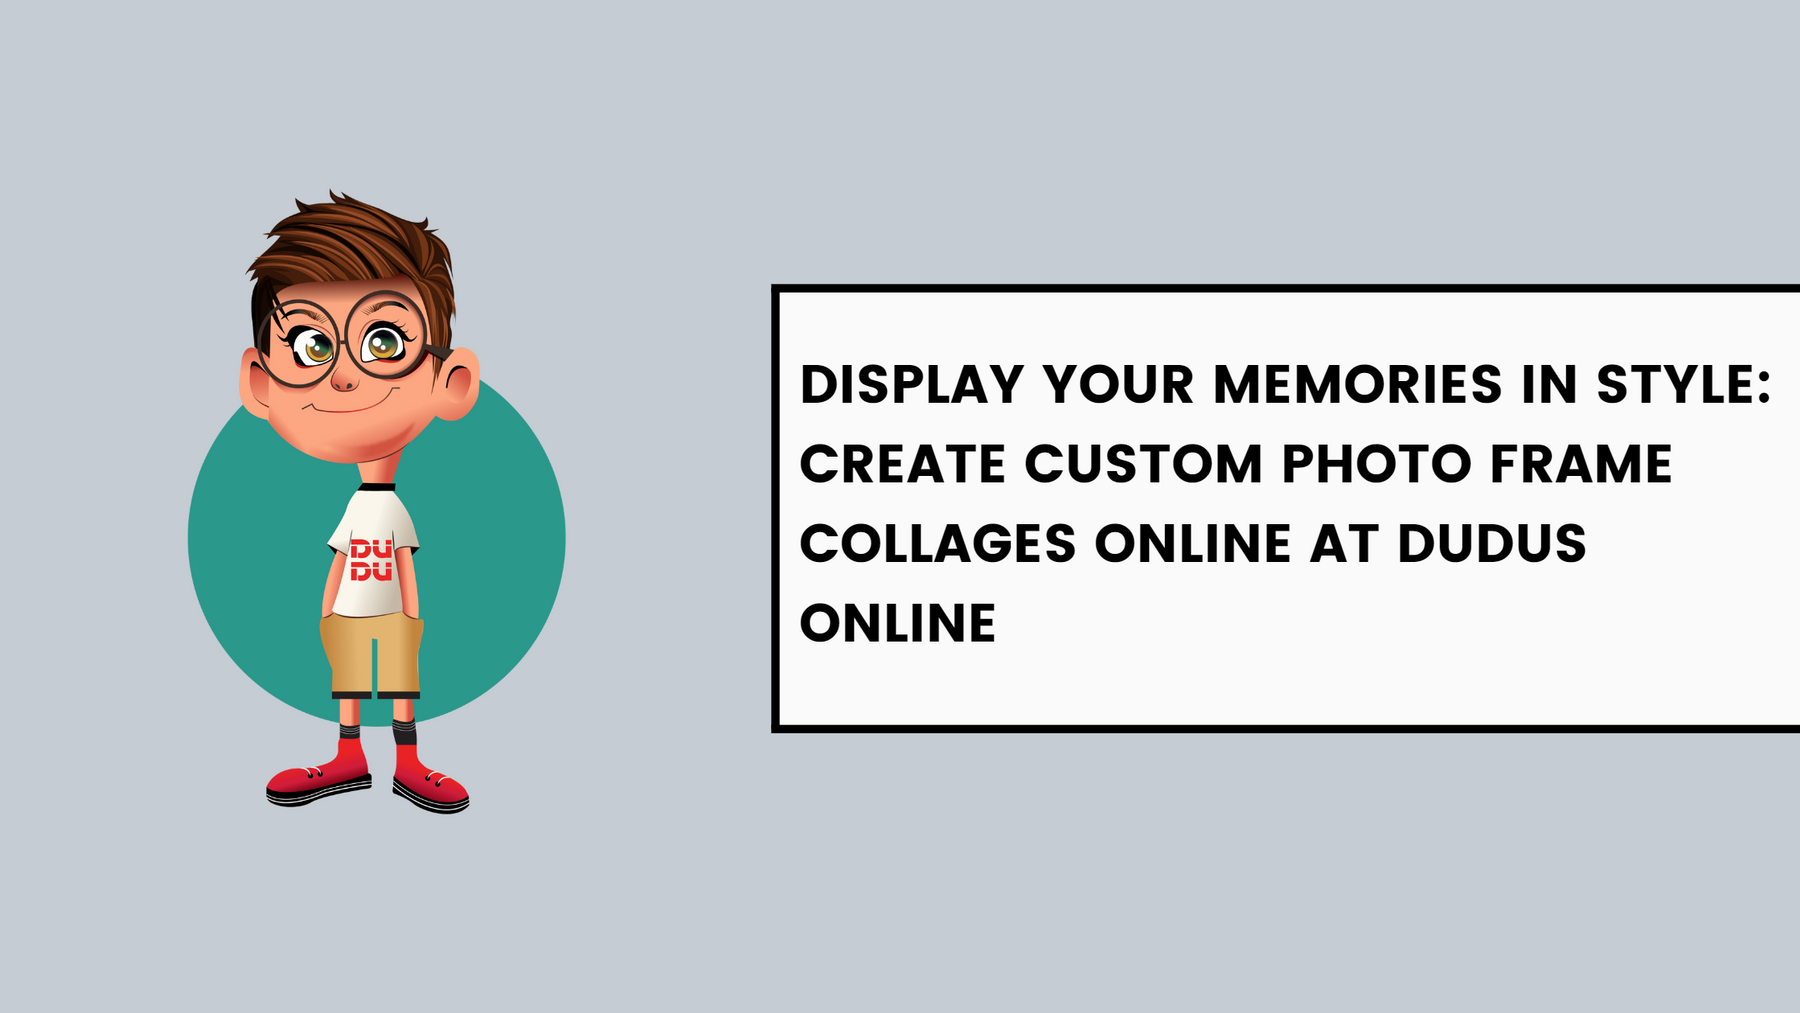 Display Your Memories in Style: Create Custom Photo Frame Collages Online at Dudus Online